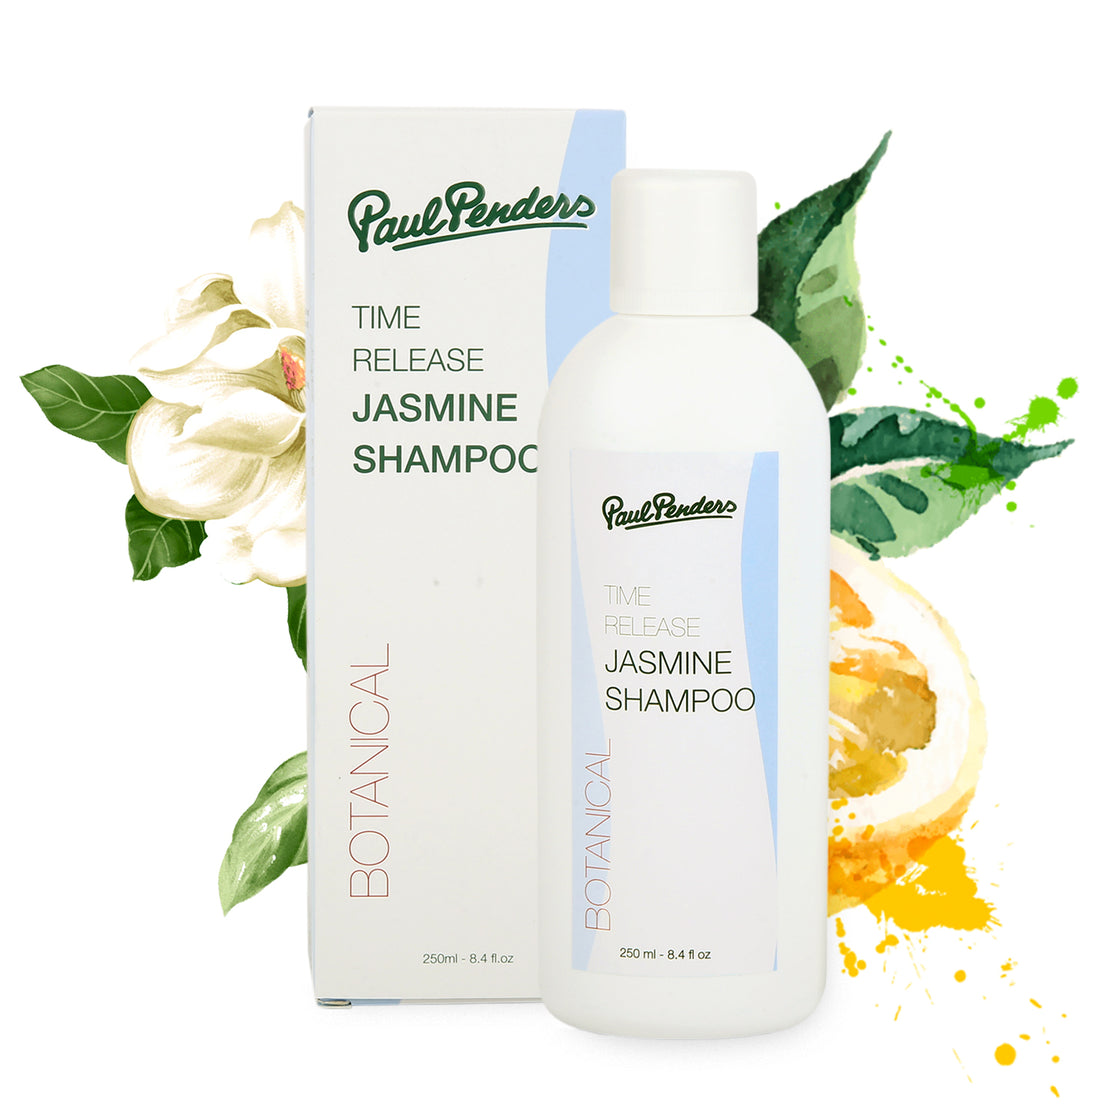 Paul Penders Time Release Jasmine Natural Shampoo For Deep Cleanse & Dry Scalp Treatment 250ml